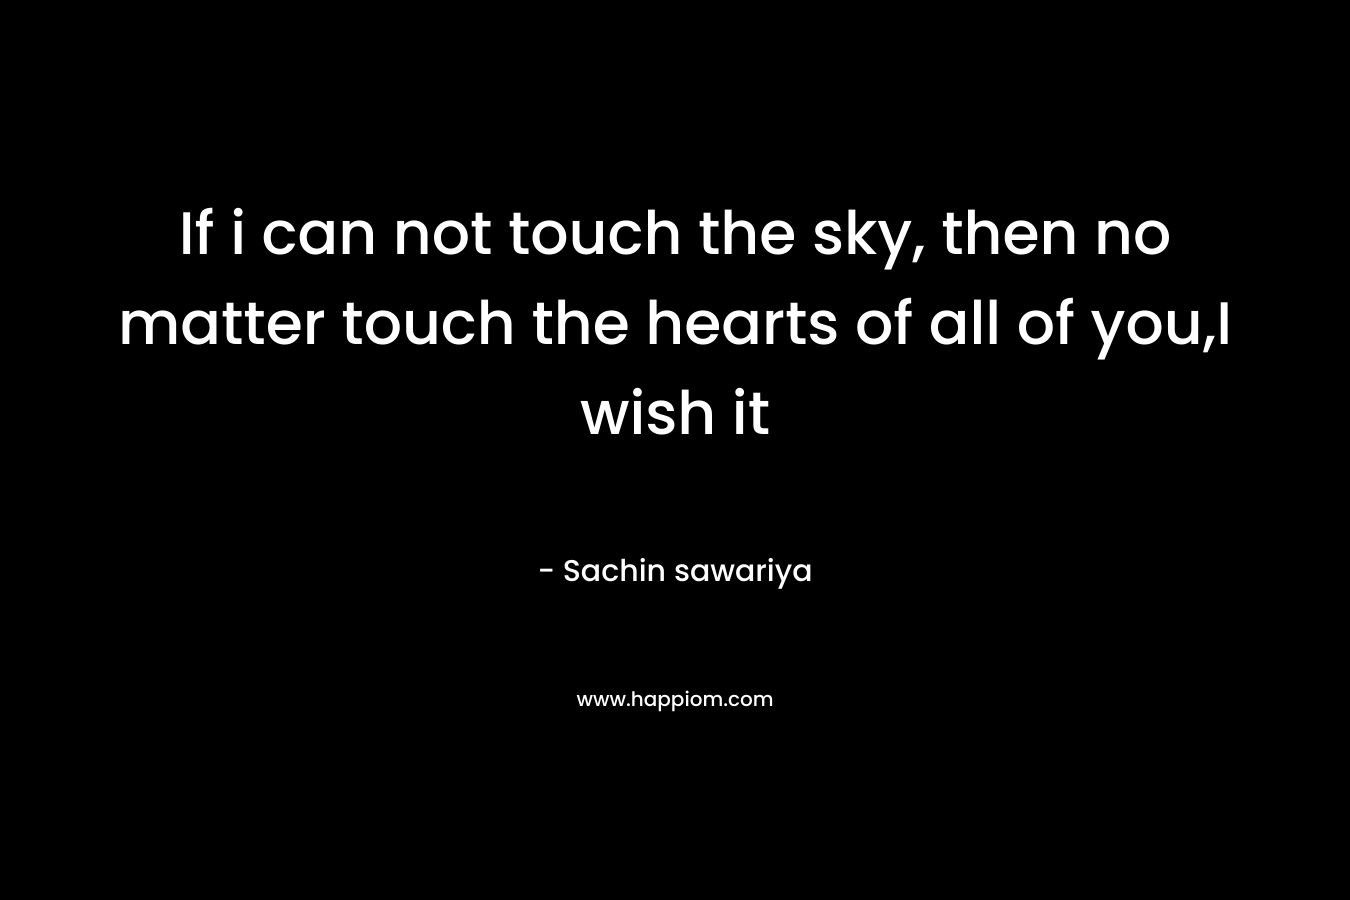 If i can not touch the sky, then no matter touch the hearts of all of you,I wish it